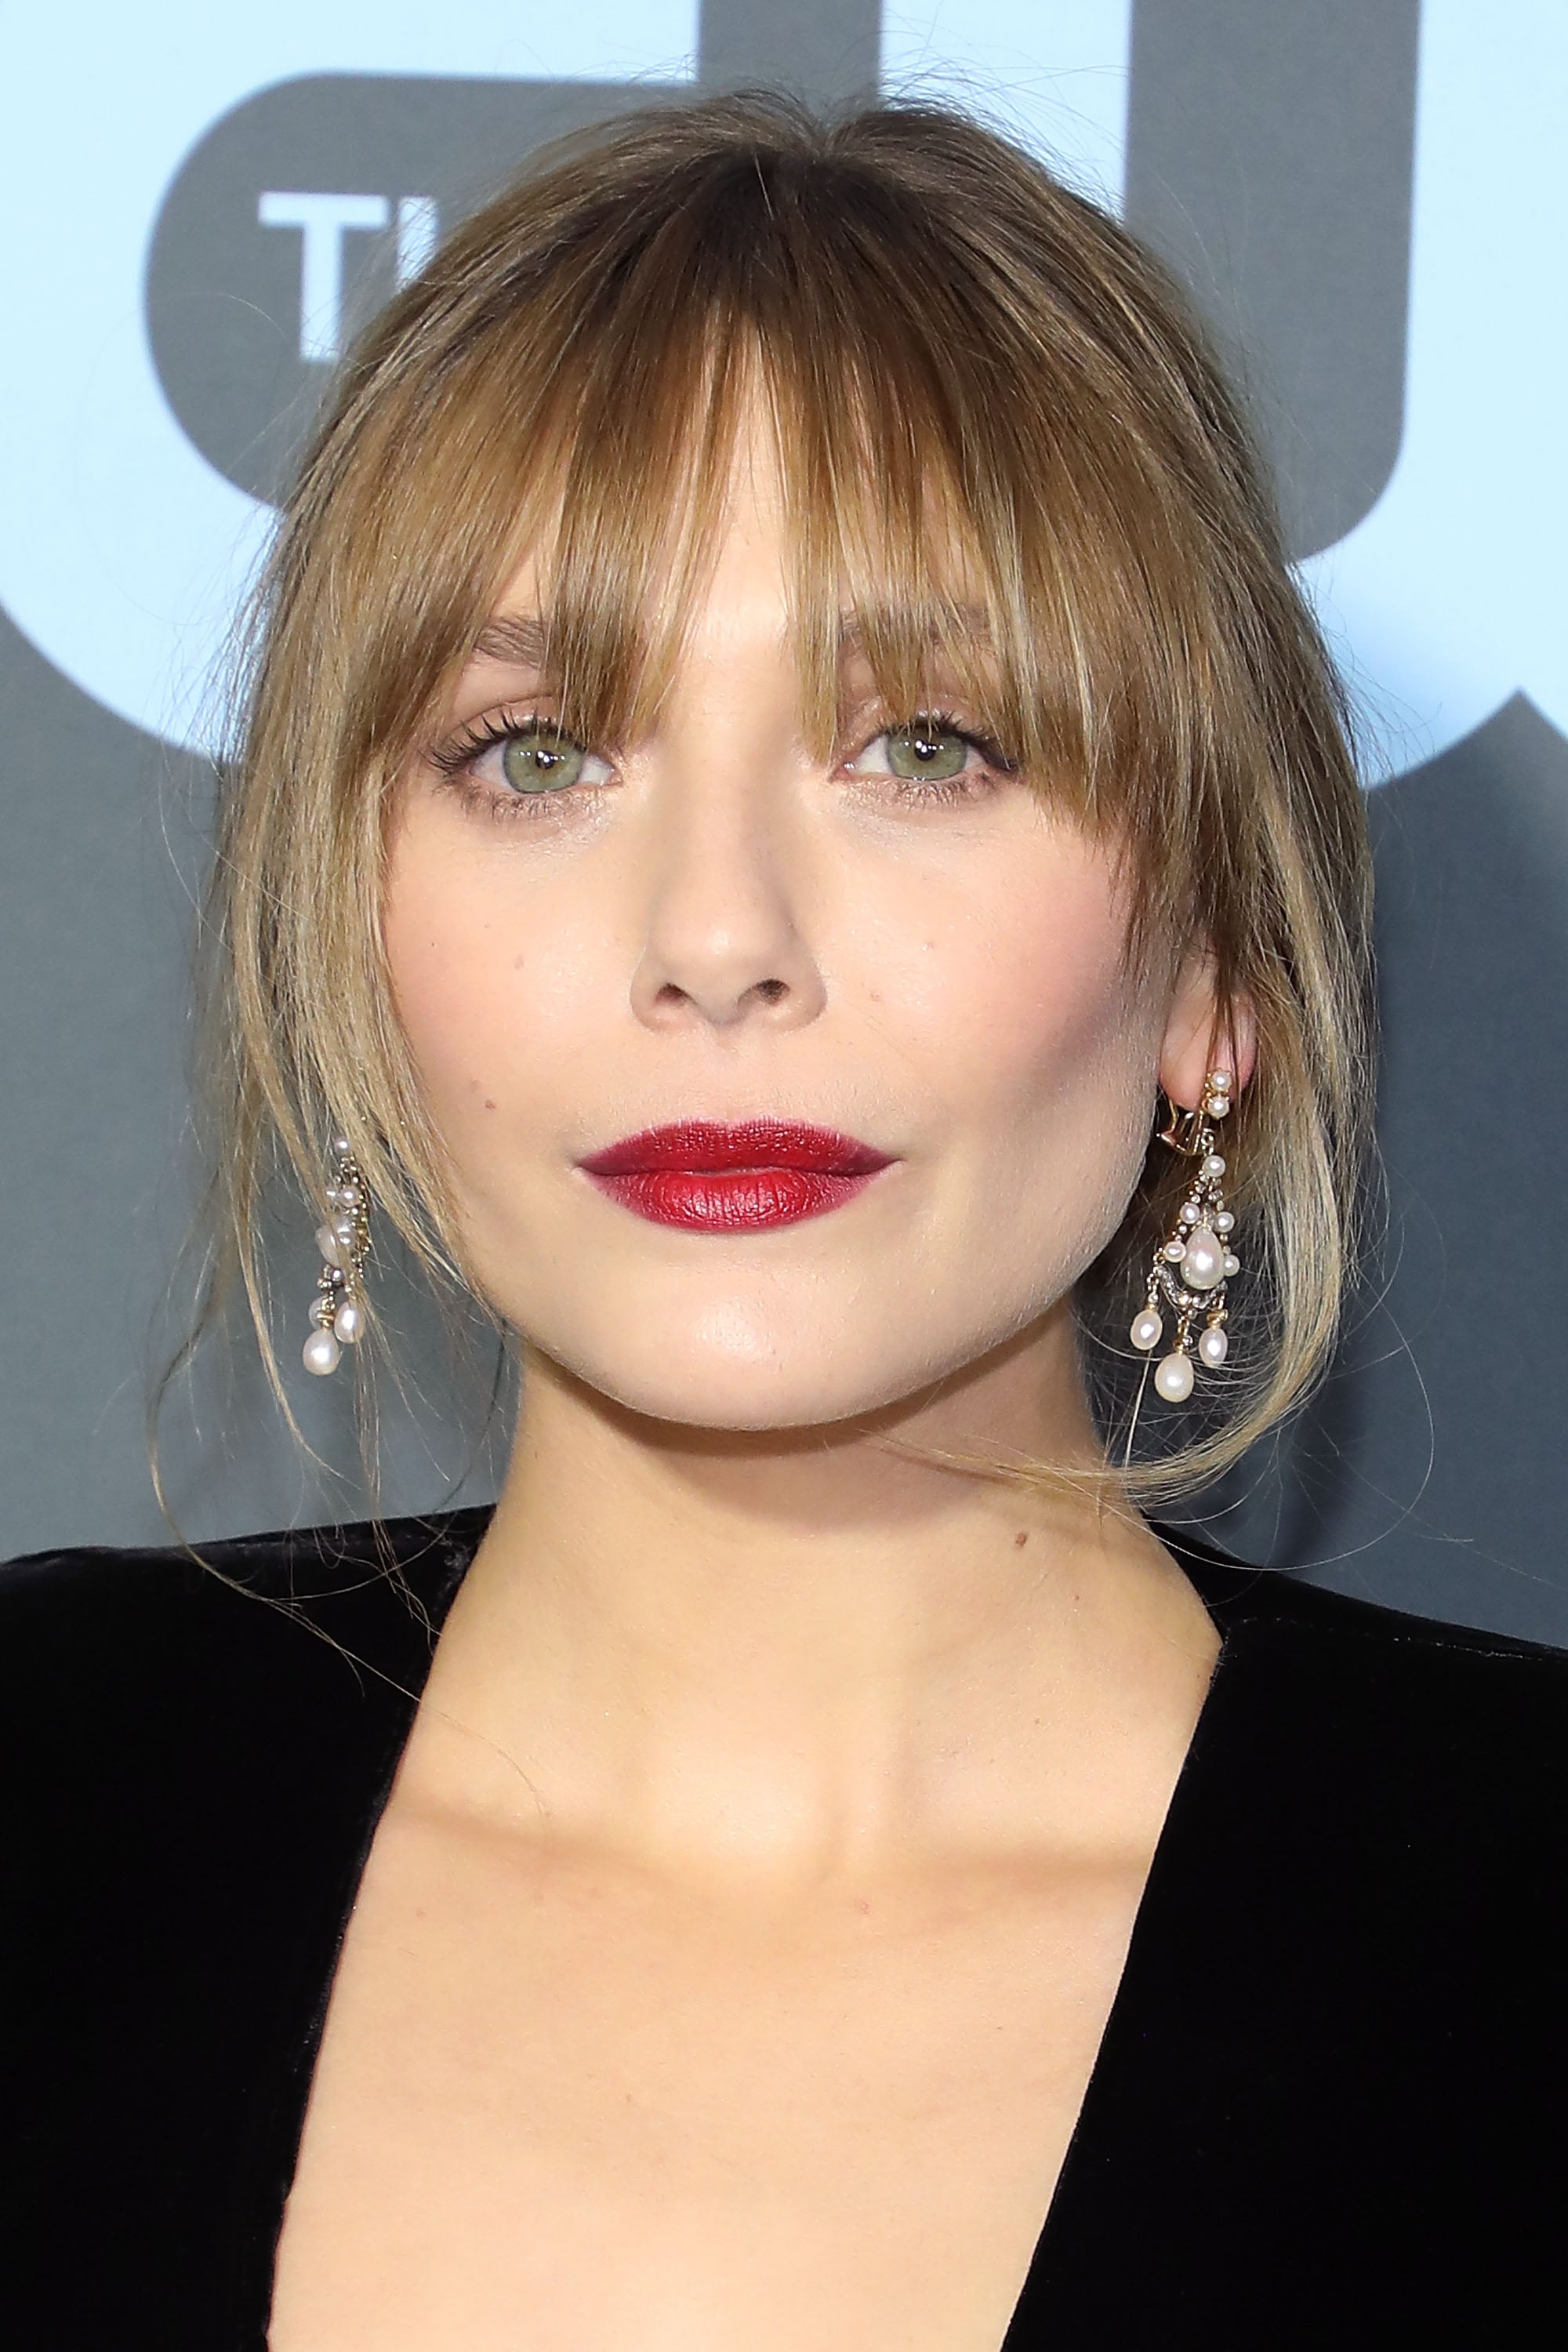 Elizabeth Olsen's top knot - Celebrity hair and hairstyles | Glamour UK